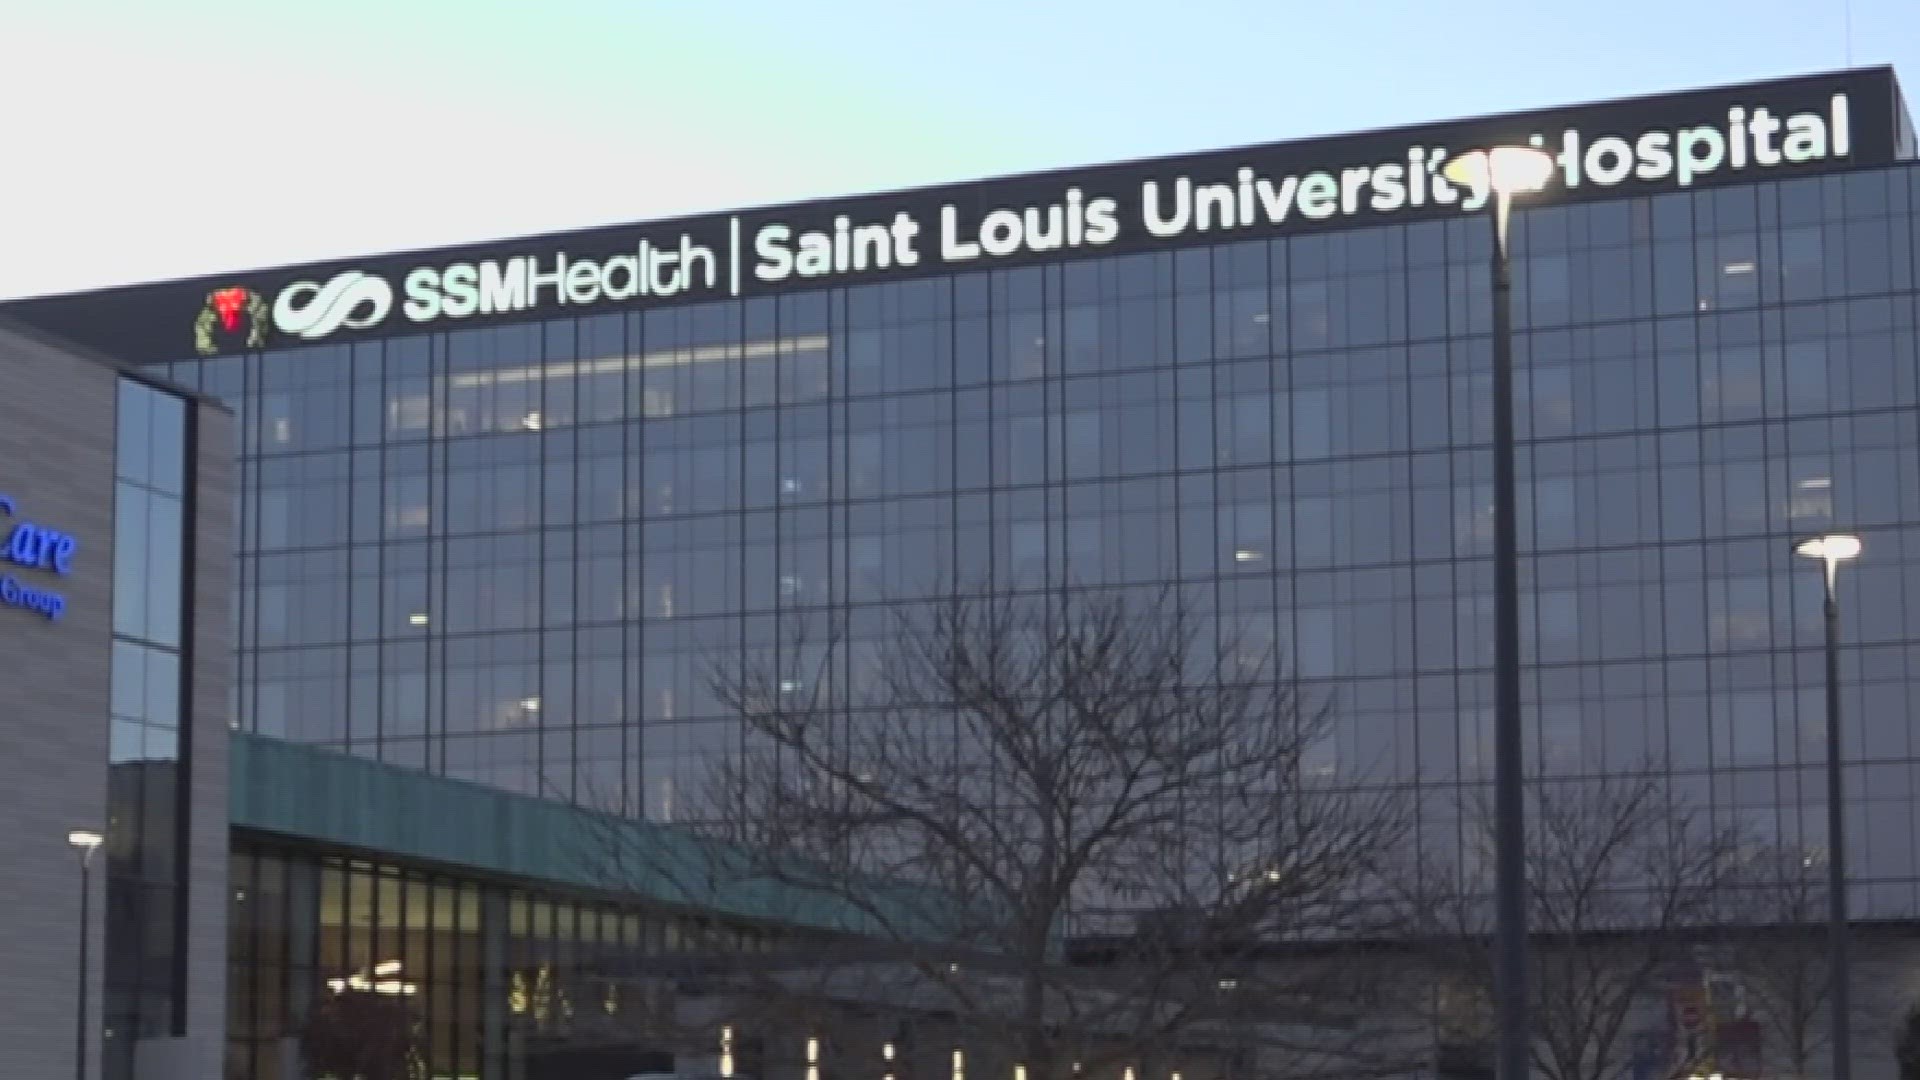 Nurses at St. Louis University Hospital are planning to hold a "candlelight vigil for patient safety." They are still negotiating for a contract.